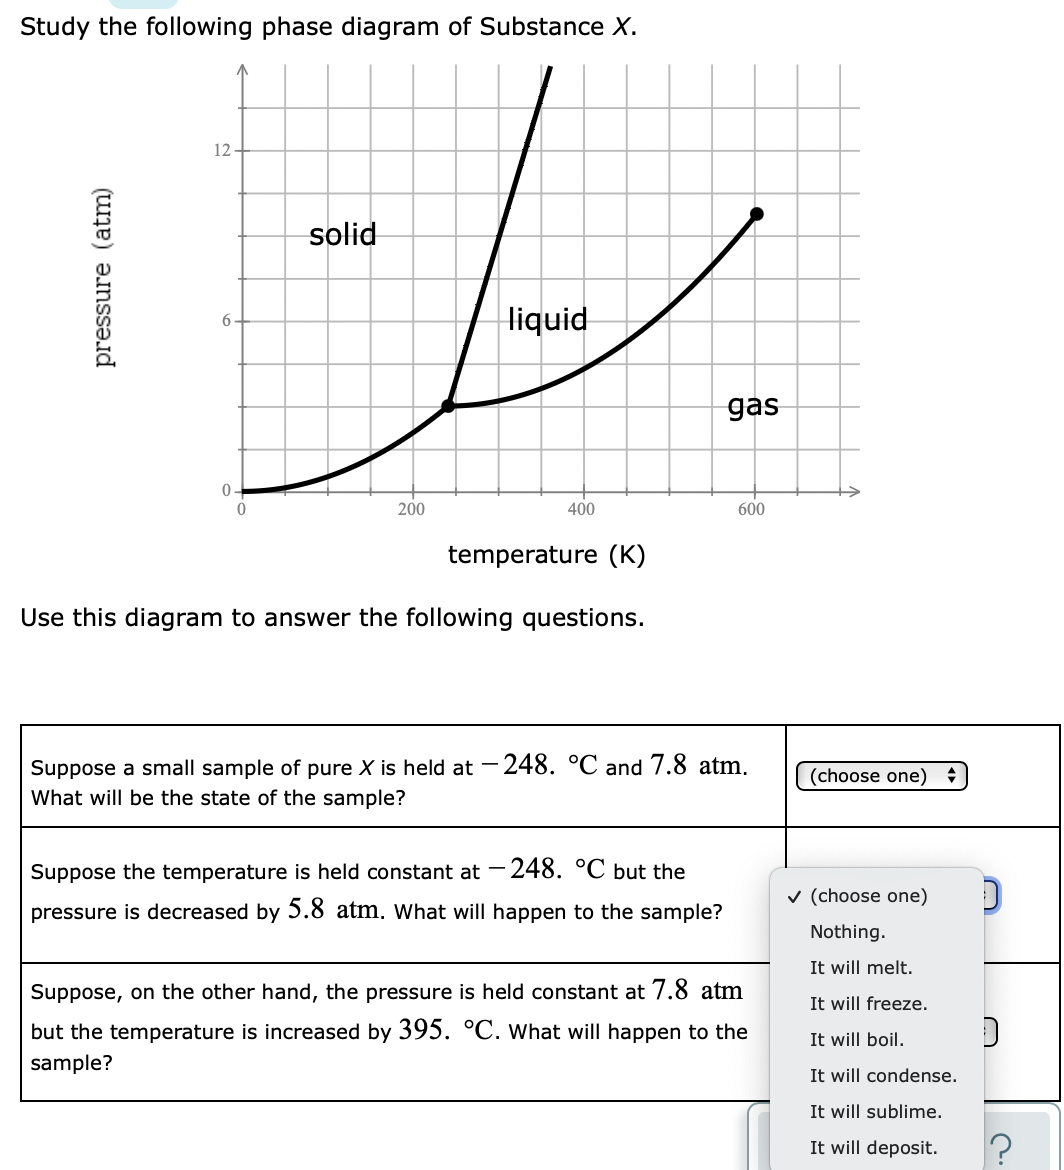 Study the following phase diagram of Substance X.
12-
solid
liquid
6.
gas
200
400
600
temperature (K)
Use this diagram to answer the following questions.
Suppose a small sample of pure X is held at - 248. °C and 7.8 atm.
What will be the state of the sample?
(choose one)
Suppose the temperature is held constant at
248. °C but the
v (choose one)
pressure is decreased by 5.8 atm. What will happen to the sample?
Nothing.
It will melt.
Suppose, on the other hand, the pressure is held constant at 7.8 atm
It will freeze.
but the temperature is increased by 395. °C. What will happen to the
It will boil.
sample?
It will condense.
It will sublime.
It will deposit.
pressure (atm)
